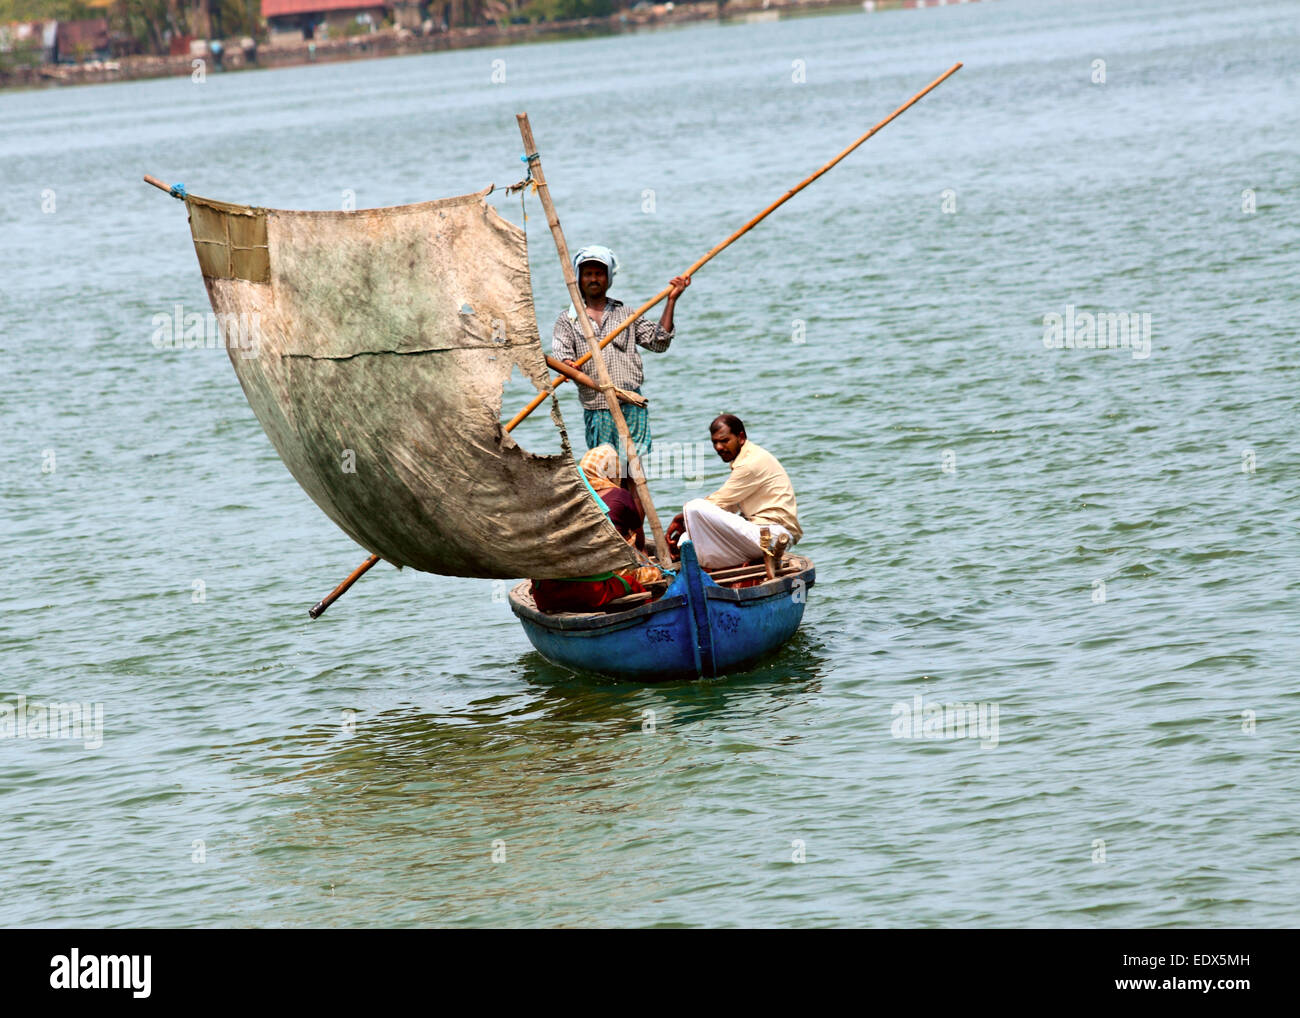 Fisherman's family sailing on a little boat in India. Stock Photo